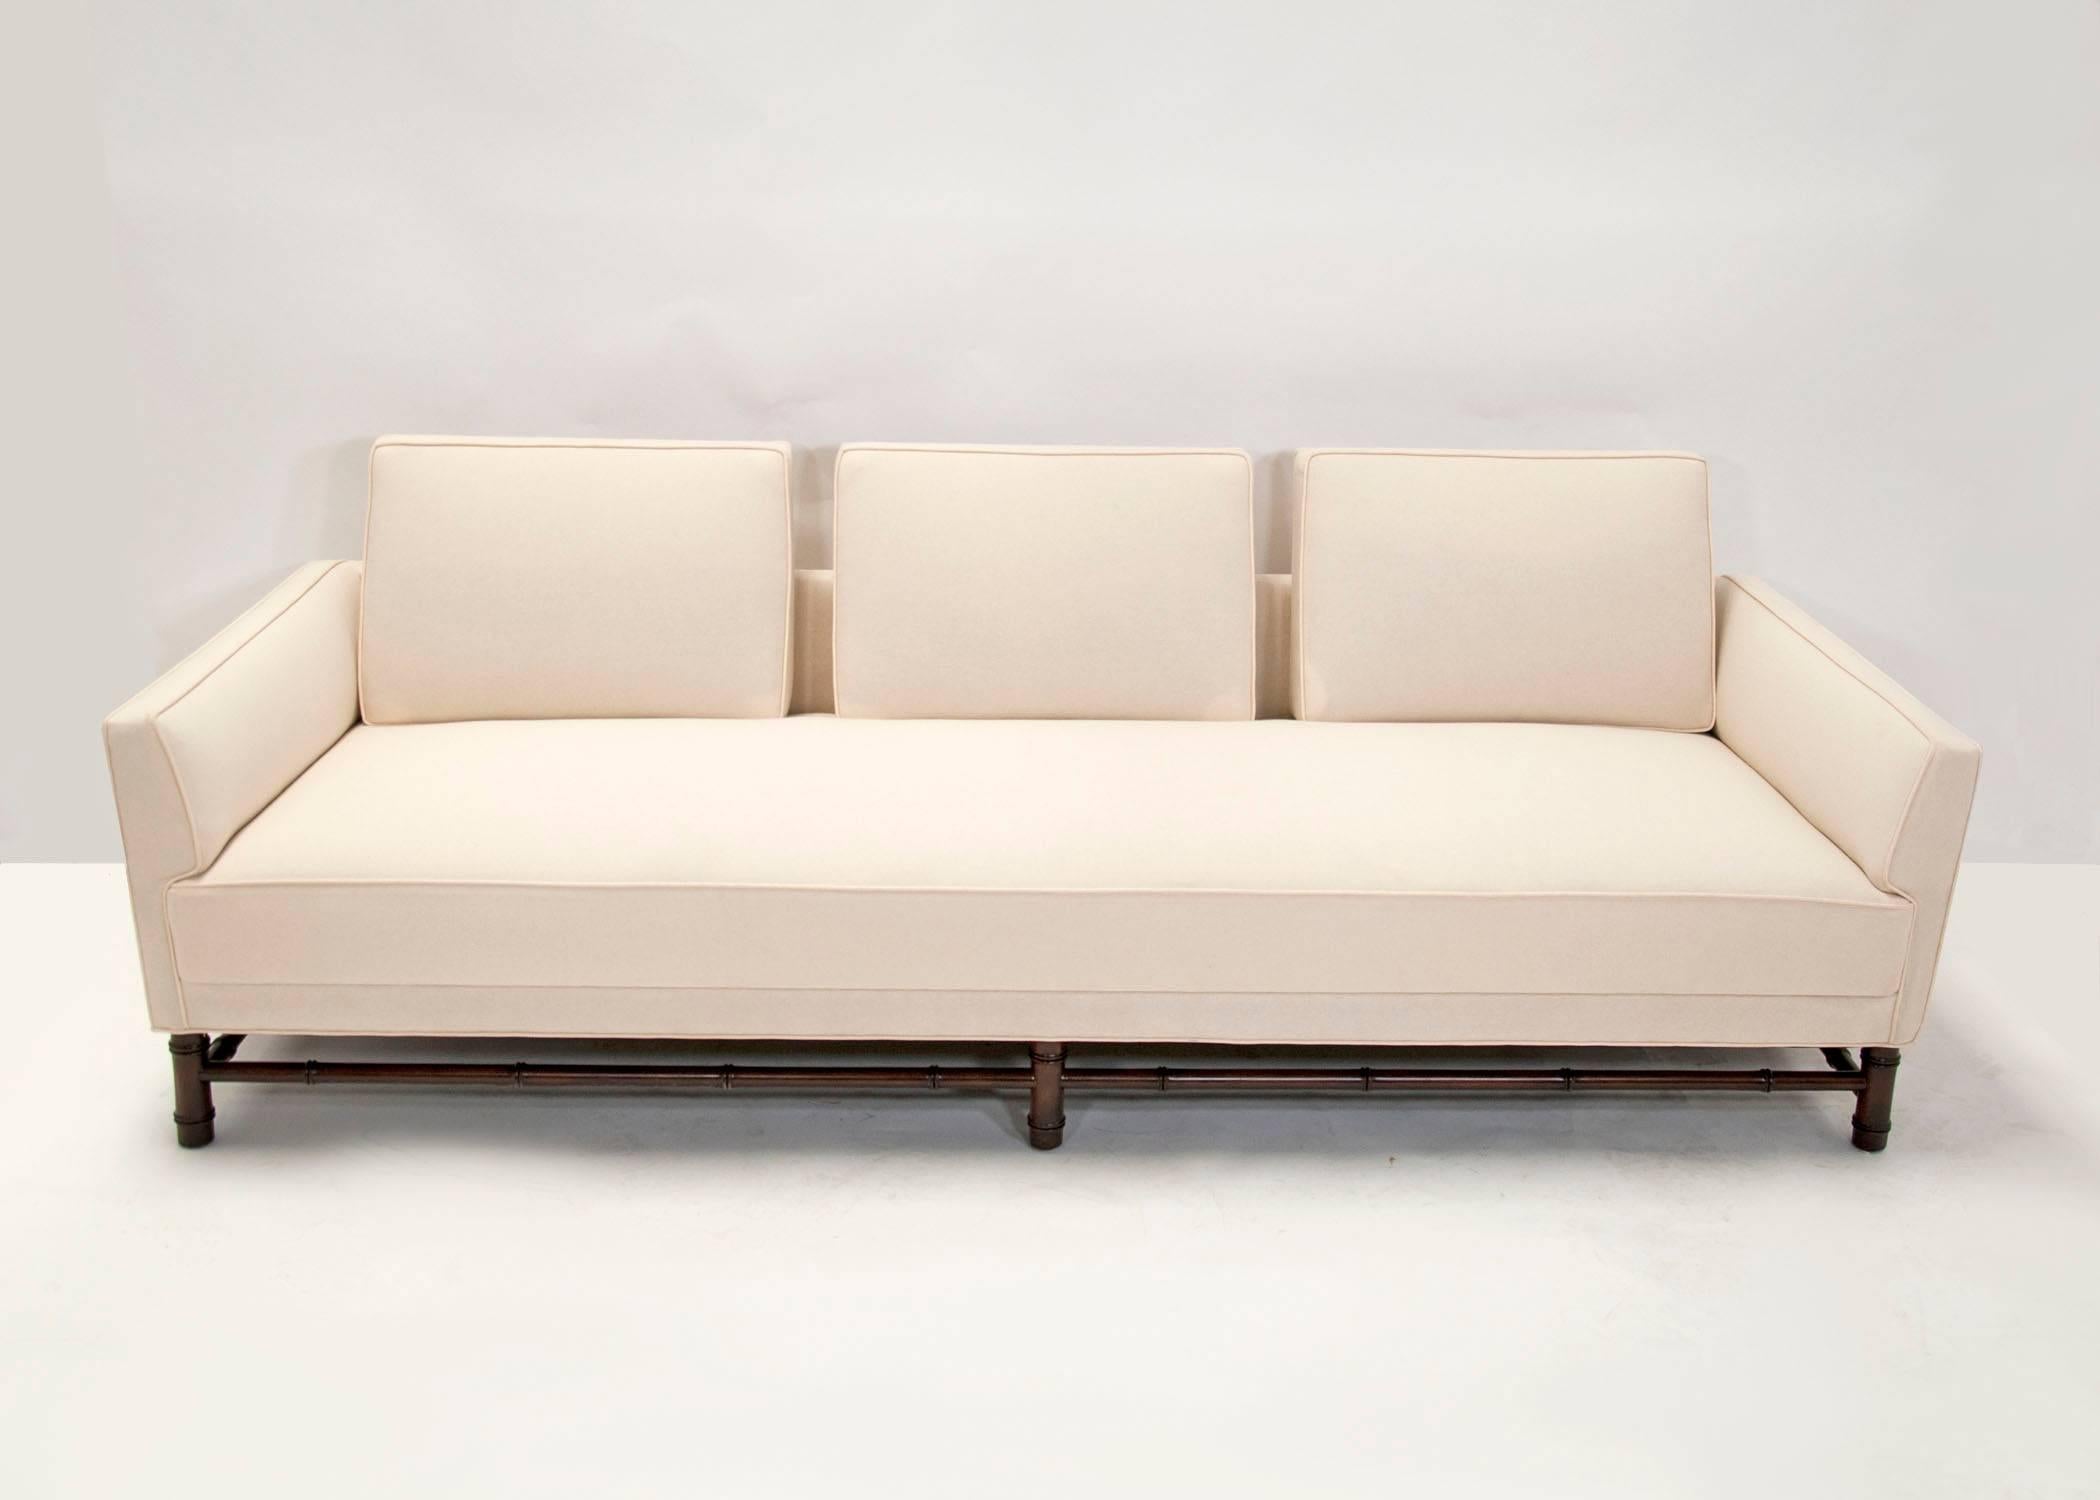 A custom Mid-Century Modern sofa in the Hollywood Regency style. Flared arms with a St Thomas style arm popularized by Billy Baldwin. Tight seat with three attached pillow backs on a faux bamboo base. Restored and re-upholstered in of white muslin.